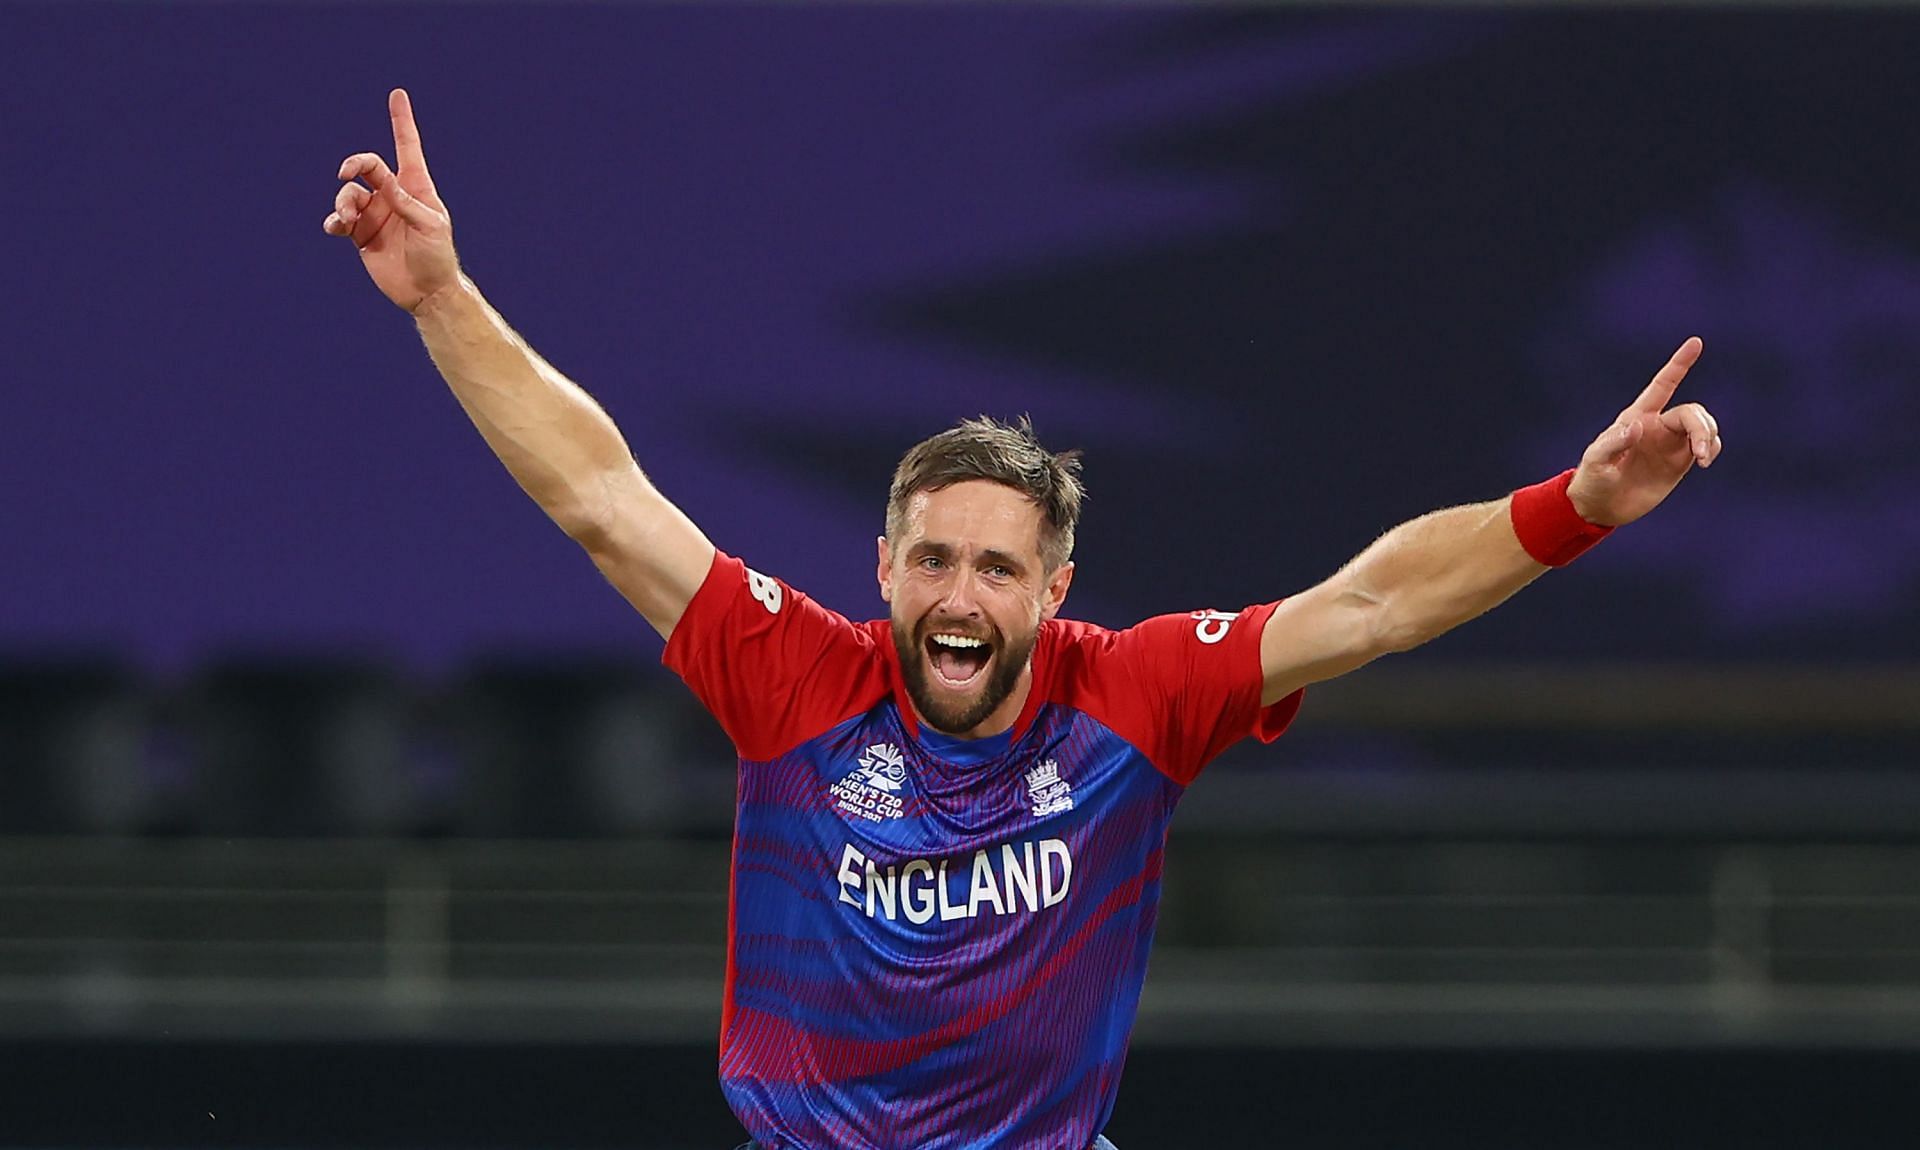 Chris Woakes has been stellar with the new ball